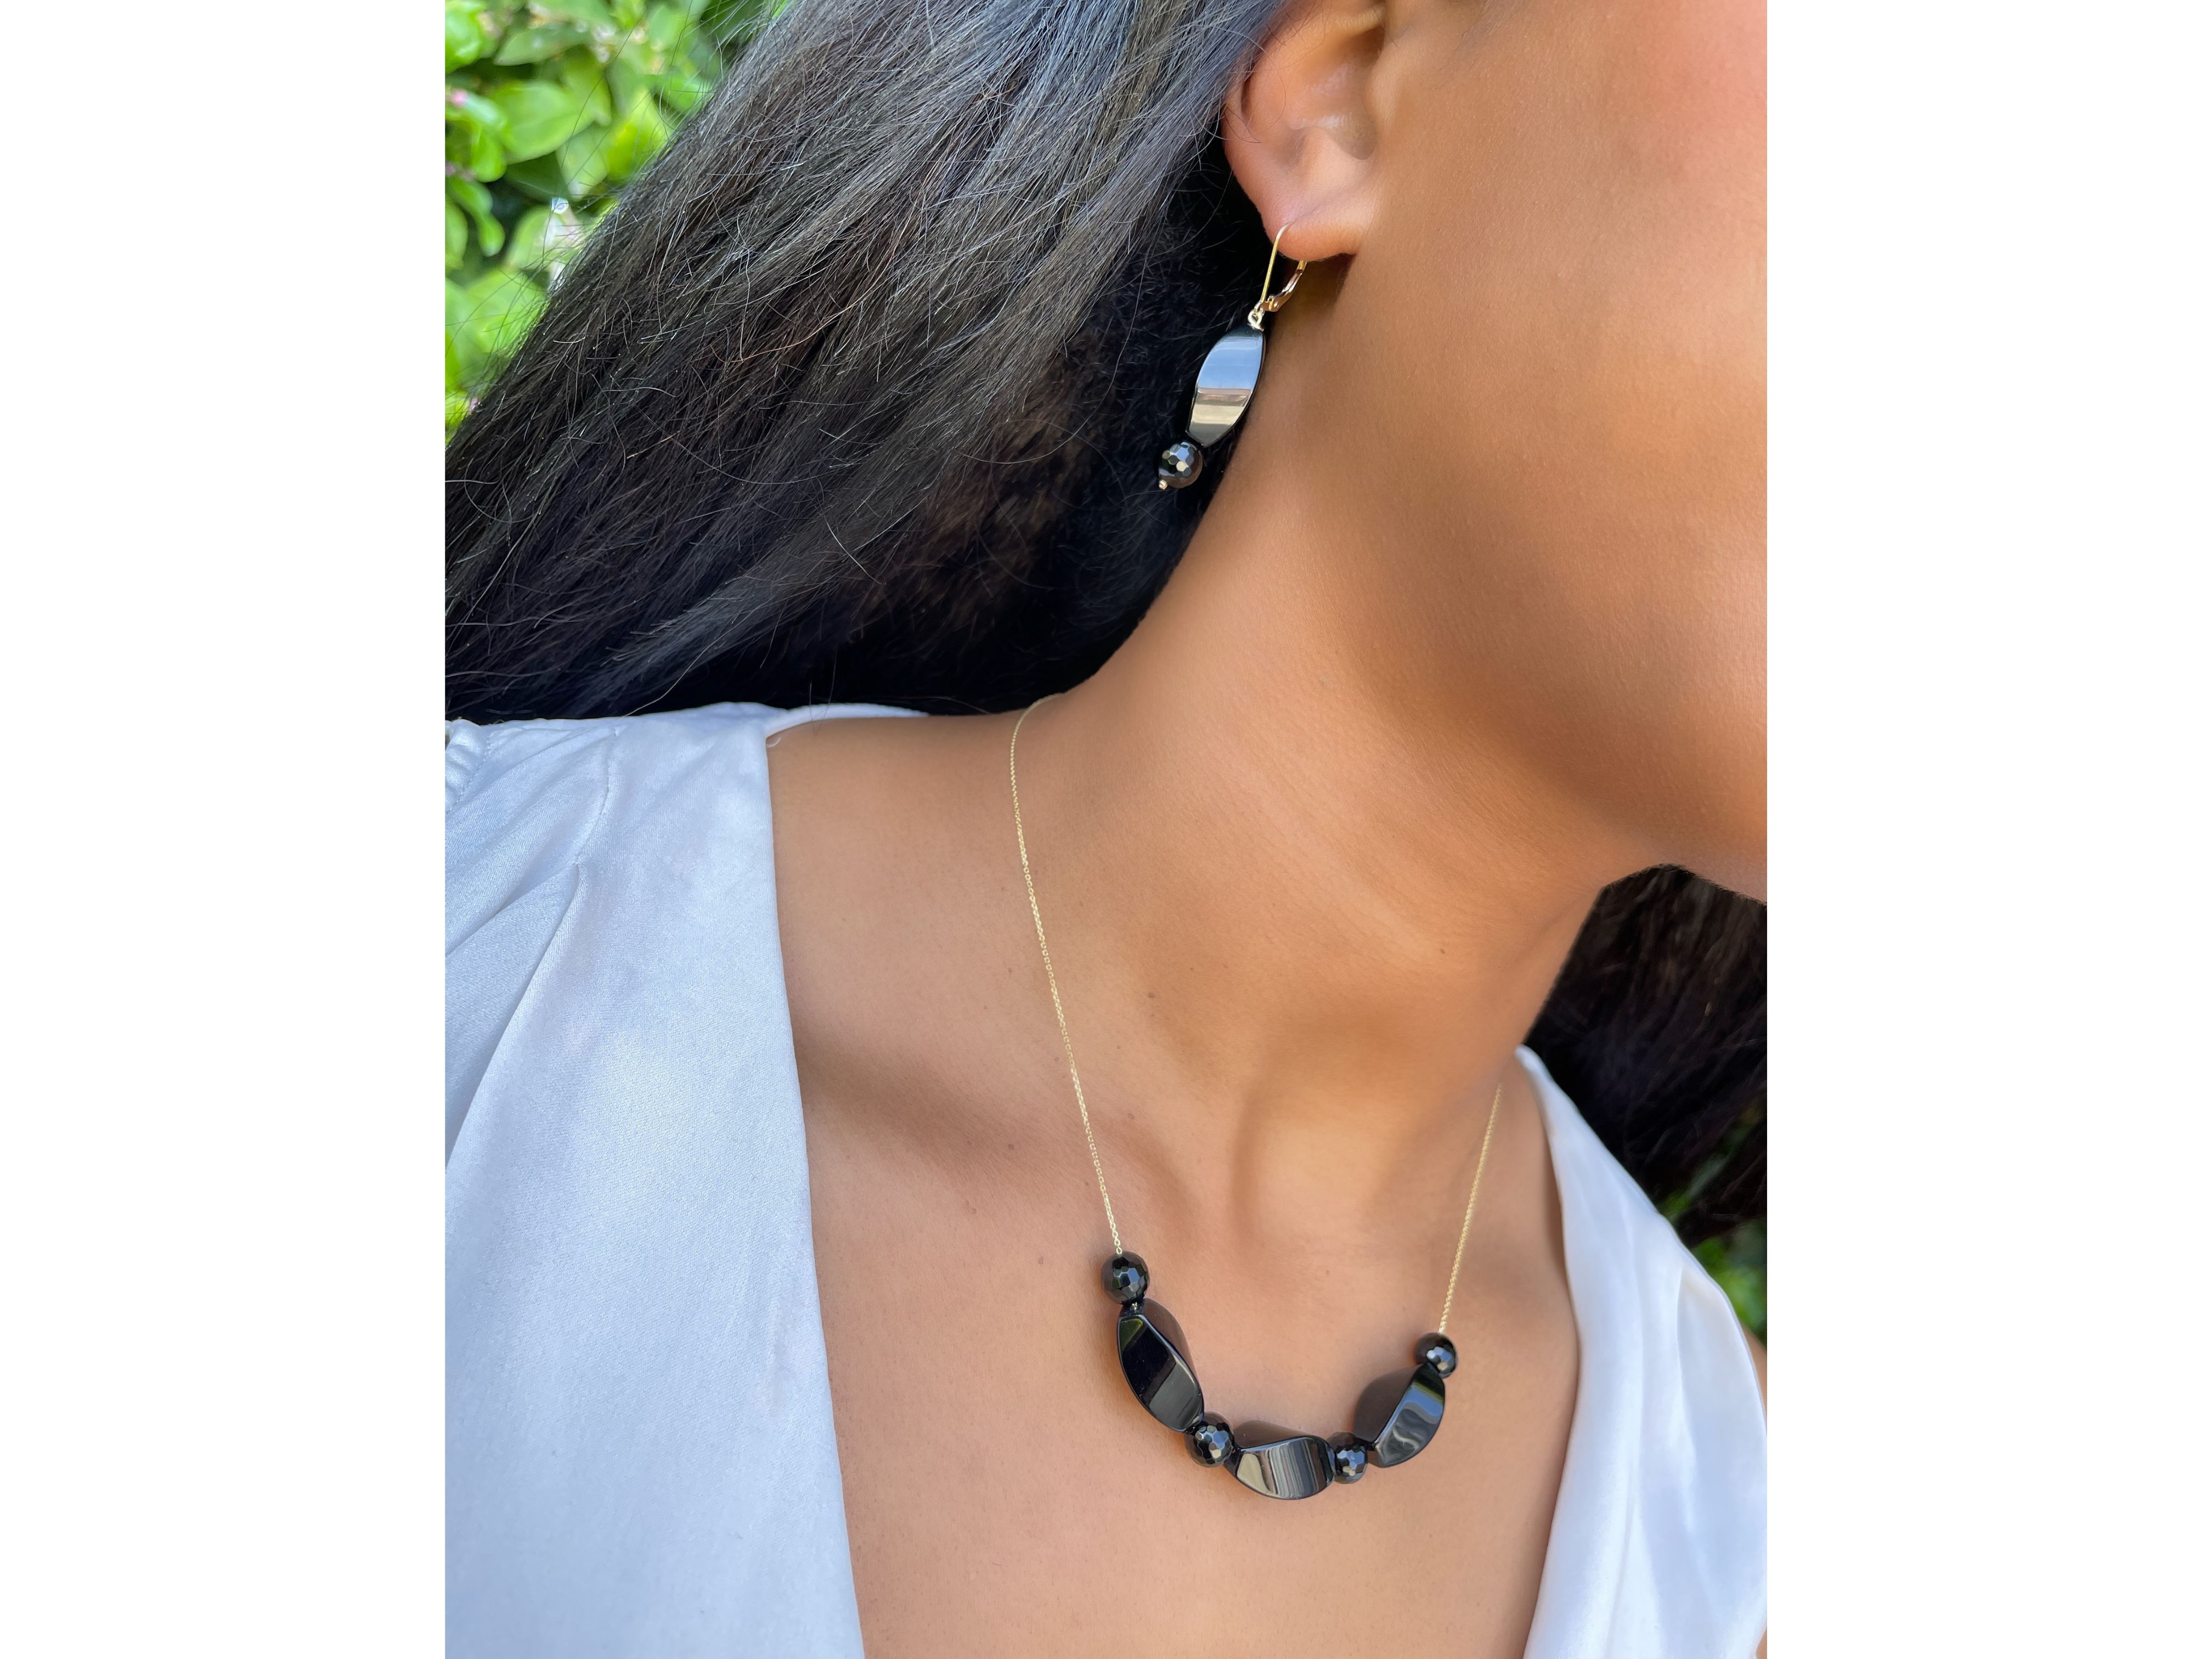 Buy SURYAGEMS Beads Made Multi Layered Strand Chain Necklace Earrings Set  Black Onyx, Cubic Zircon Haar Chain Mala Jewellery Set for Mother, Sister  and WifeMX 150-BLACK_ at Amazon.in